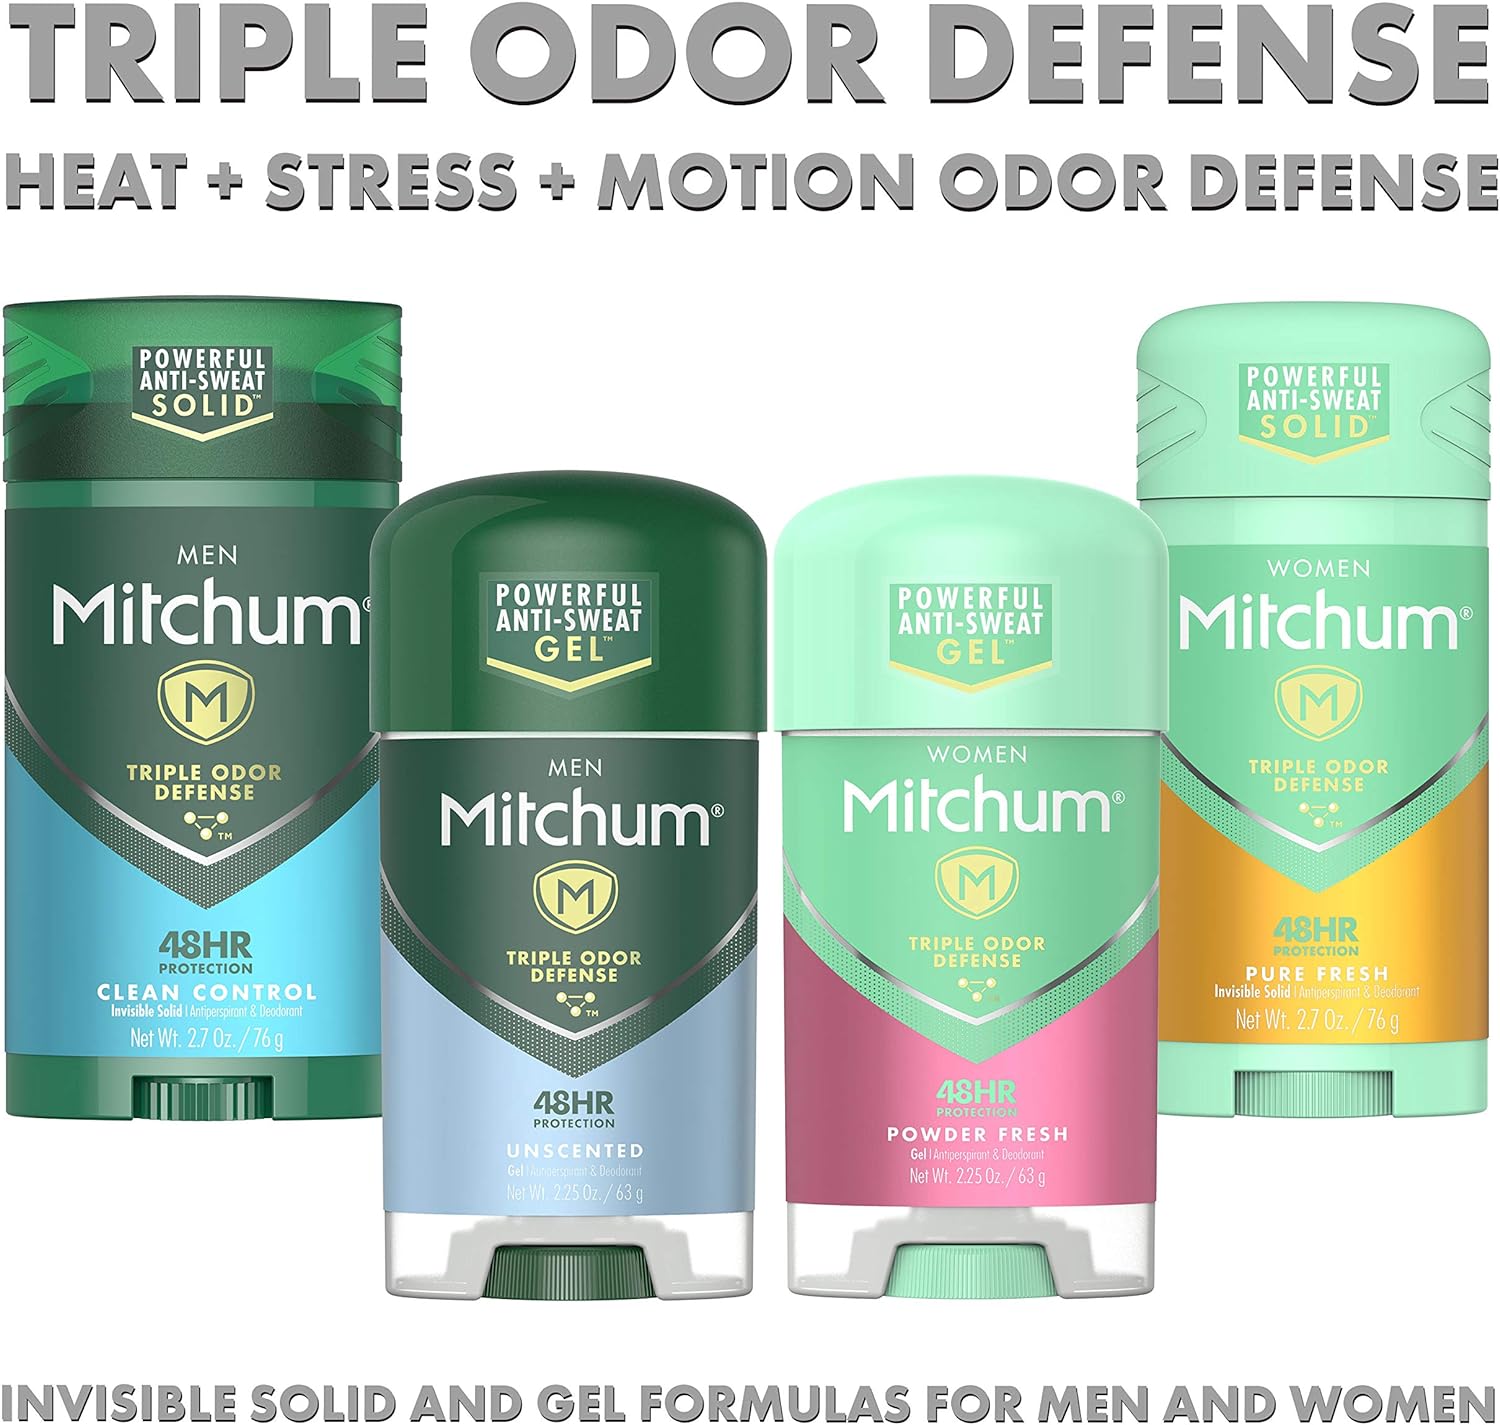 Mitchum Women's Deodorant, Antiperspirant Stick, Triple Odor Defense Gel, 48 Hr Protection, Shower Fresh, 3.4 Oz (Pack of 2) : Beauty & Personal Care